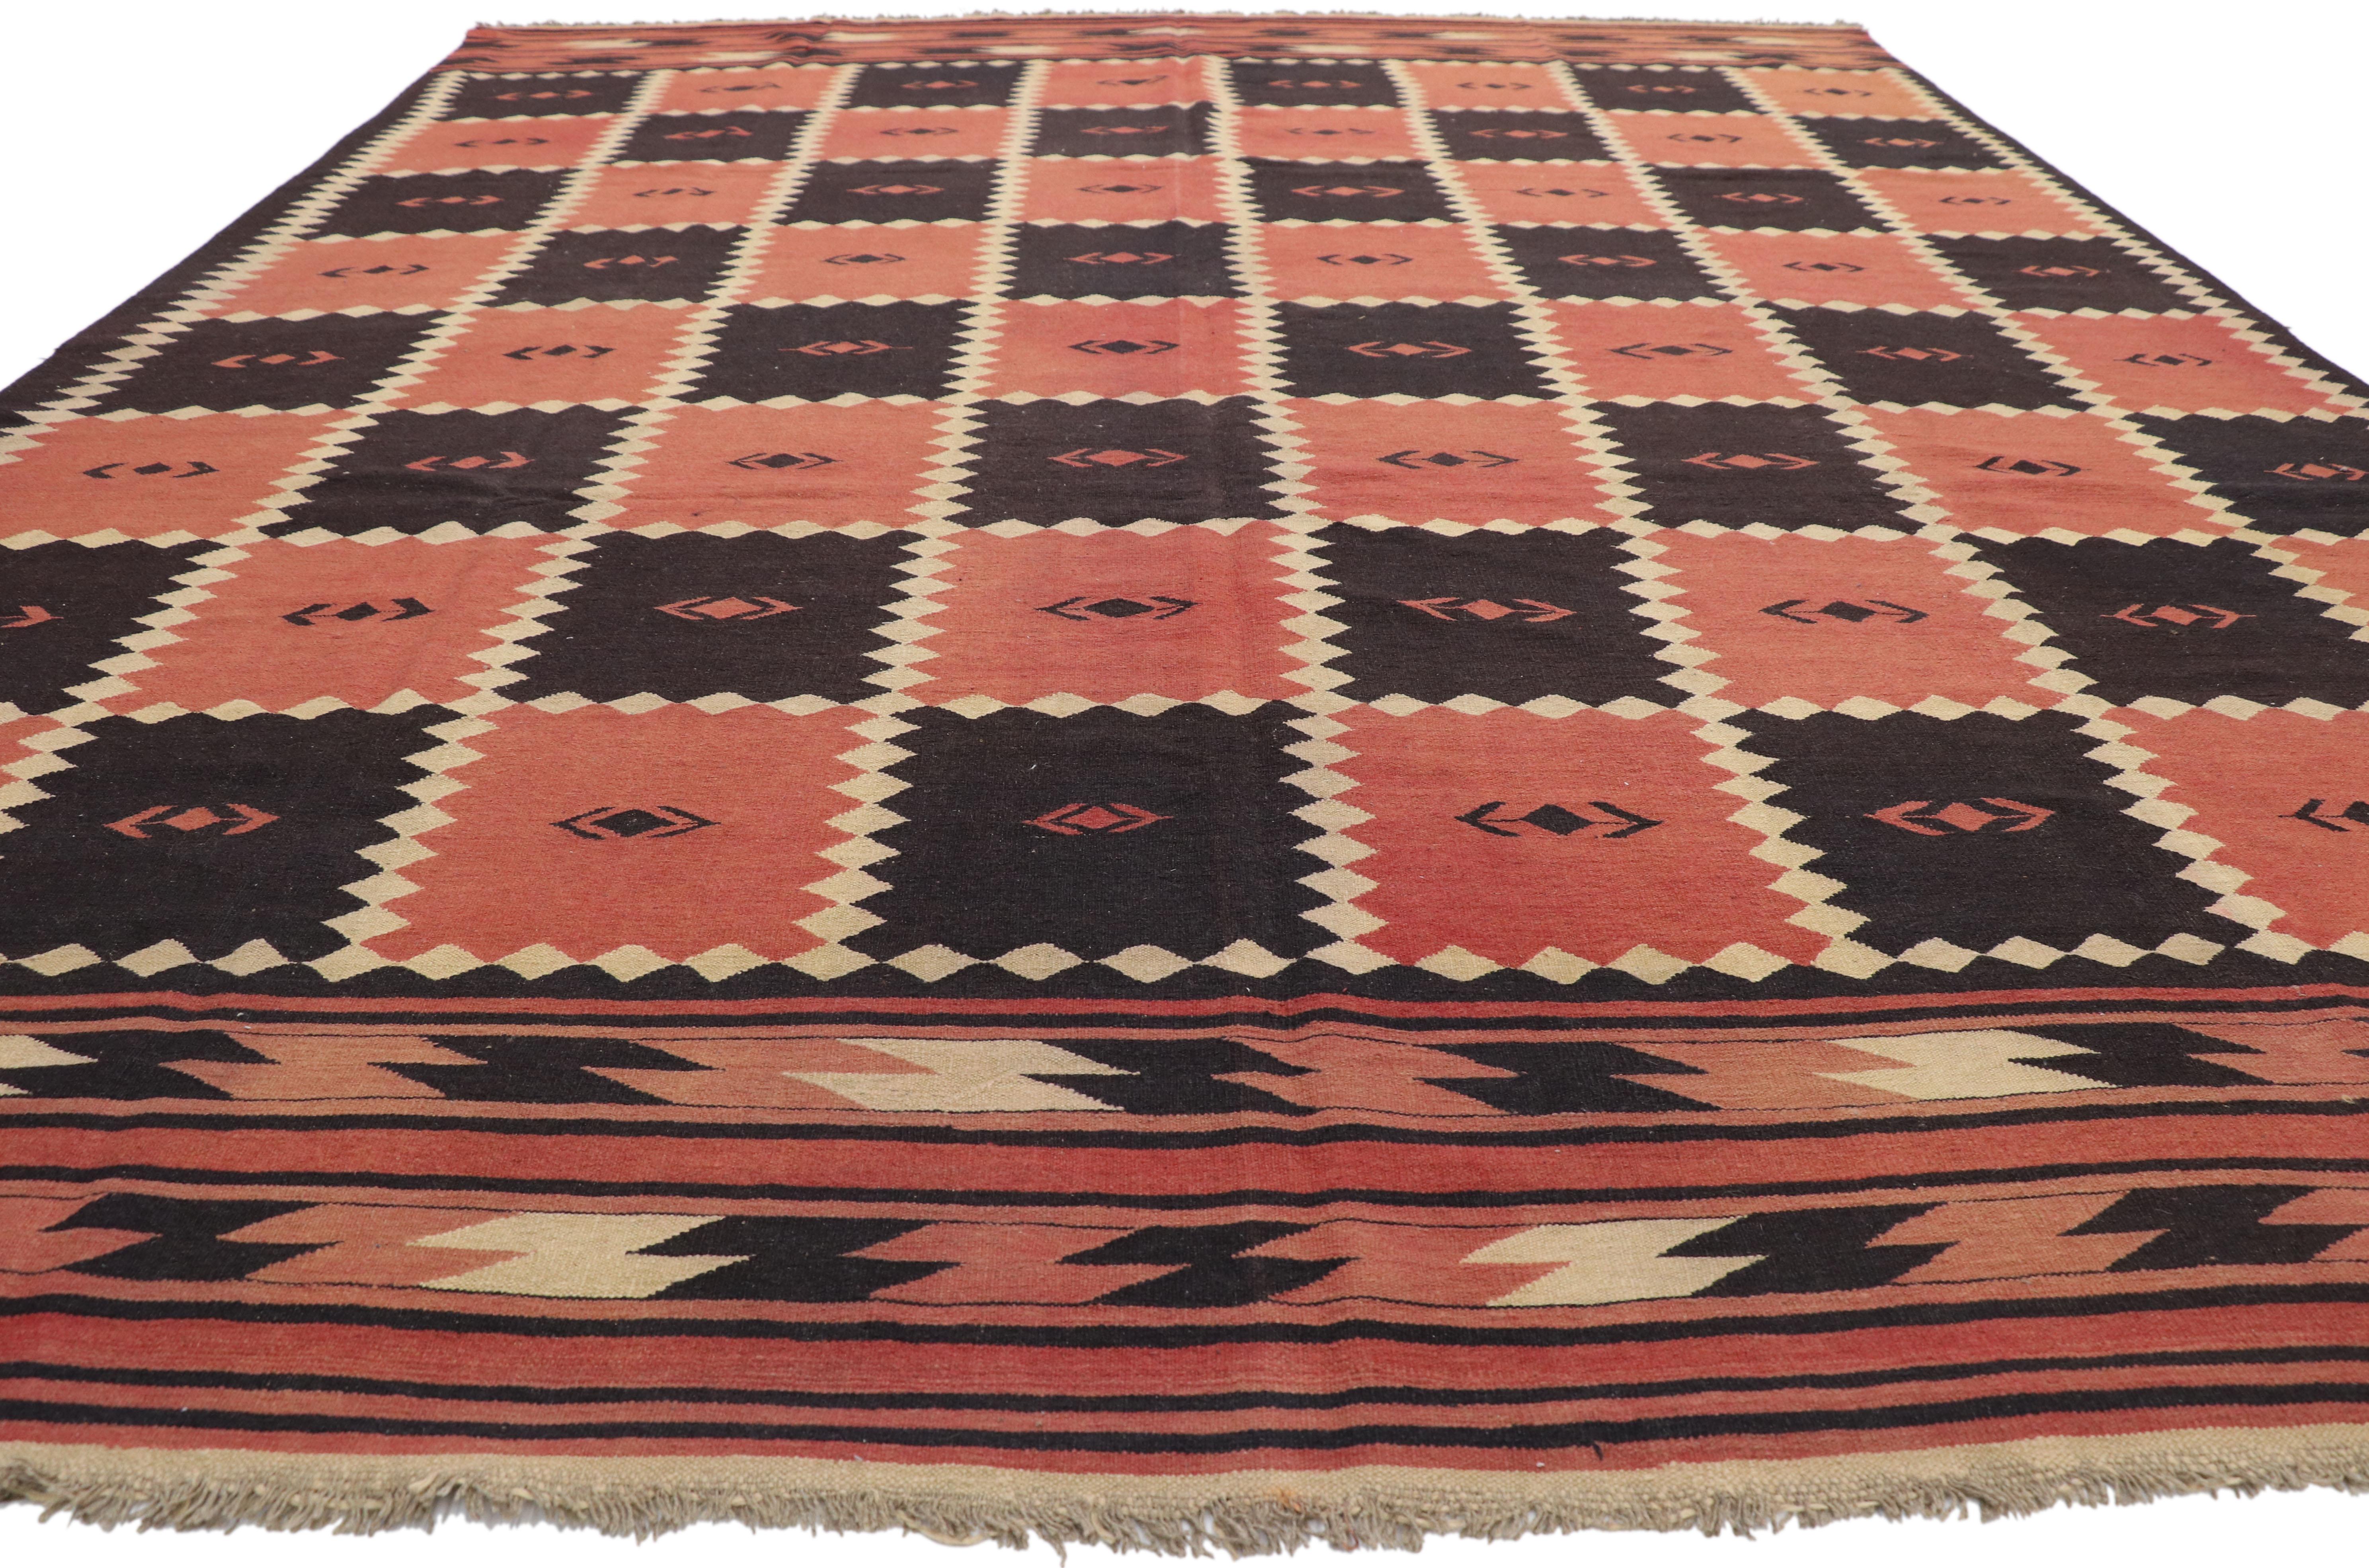 Hand-Woven Vintage Afghani Kilim Rug with Checkerboard Design and Modern Tribal Style For Sale